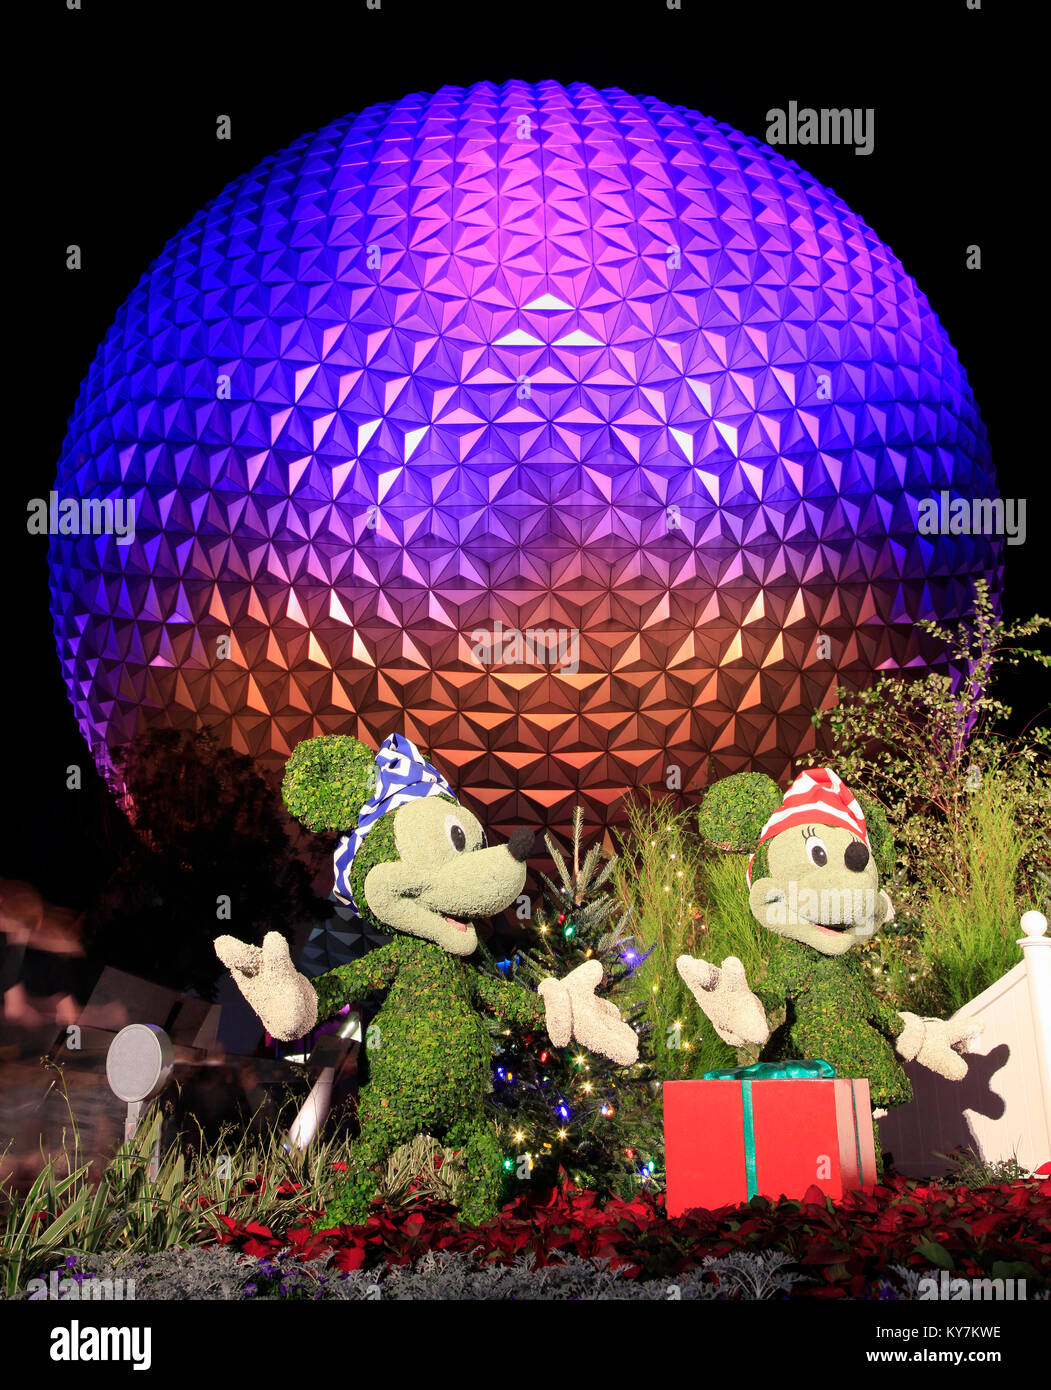 Disney's EPCOT Center sphere illuminated at night during Holidays Season with Mickey Mouse, Minnie and Pluto characters grass sculptures on the foregr Stock Photo